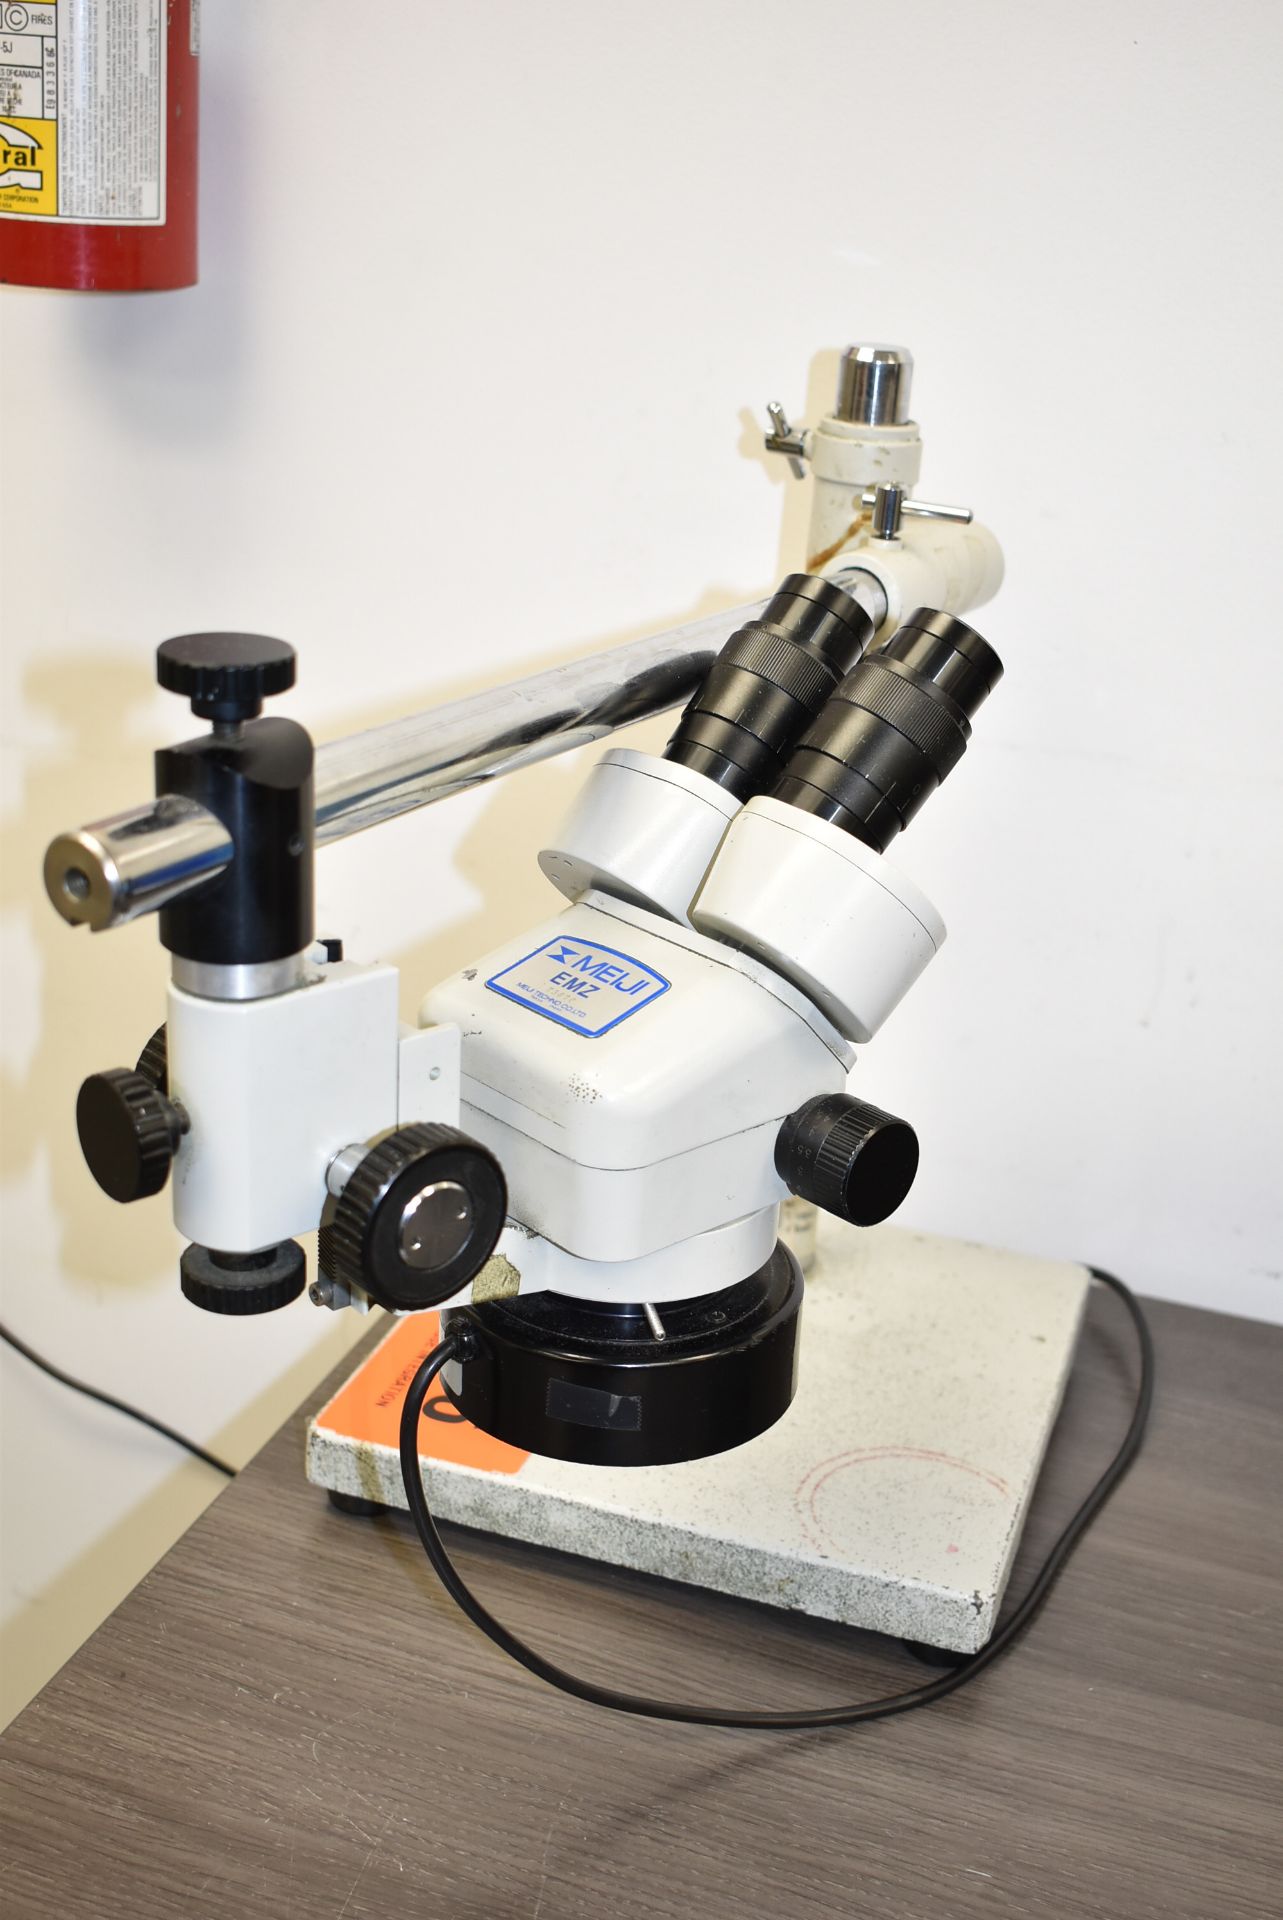 MEIJI EMZ STEREO MICROSCOPE, S/N 73670 [RIGGING FEE FOR LOT #206 - $30 USD PLUS APPLICABLE TAXES] - Image 2 of 4